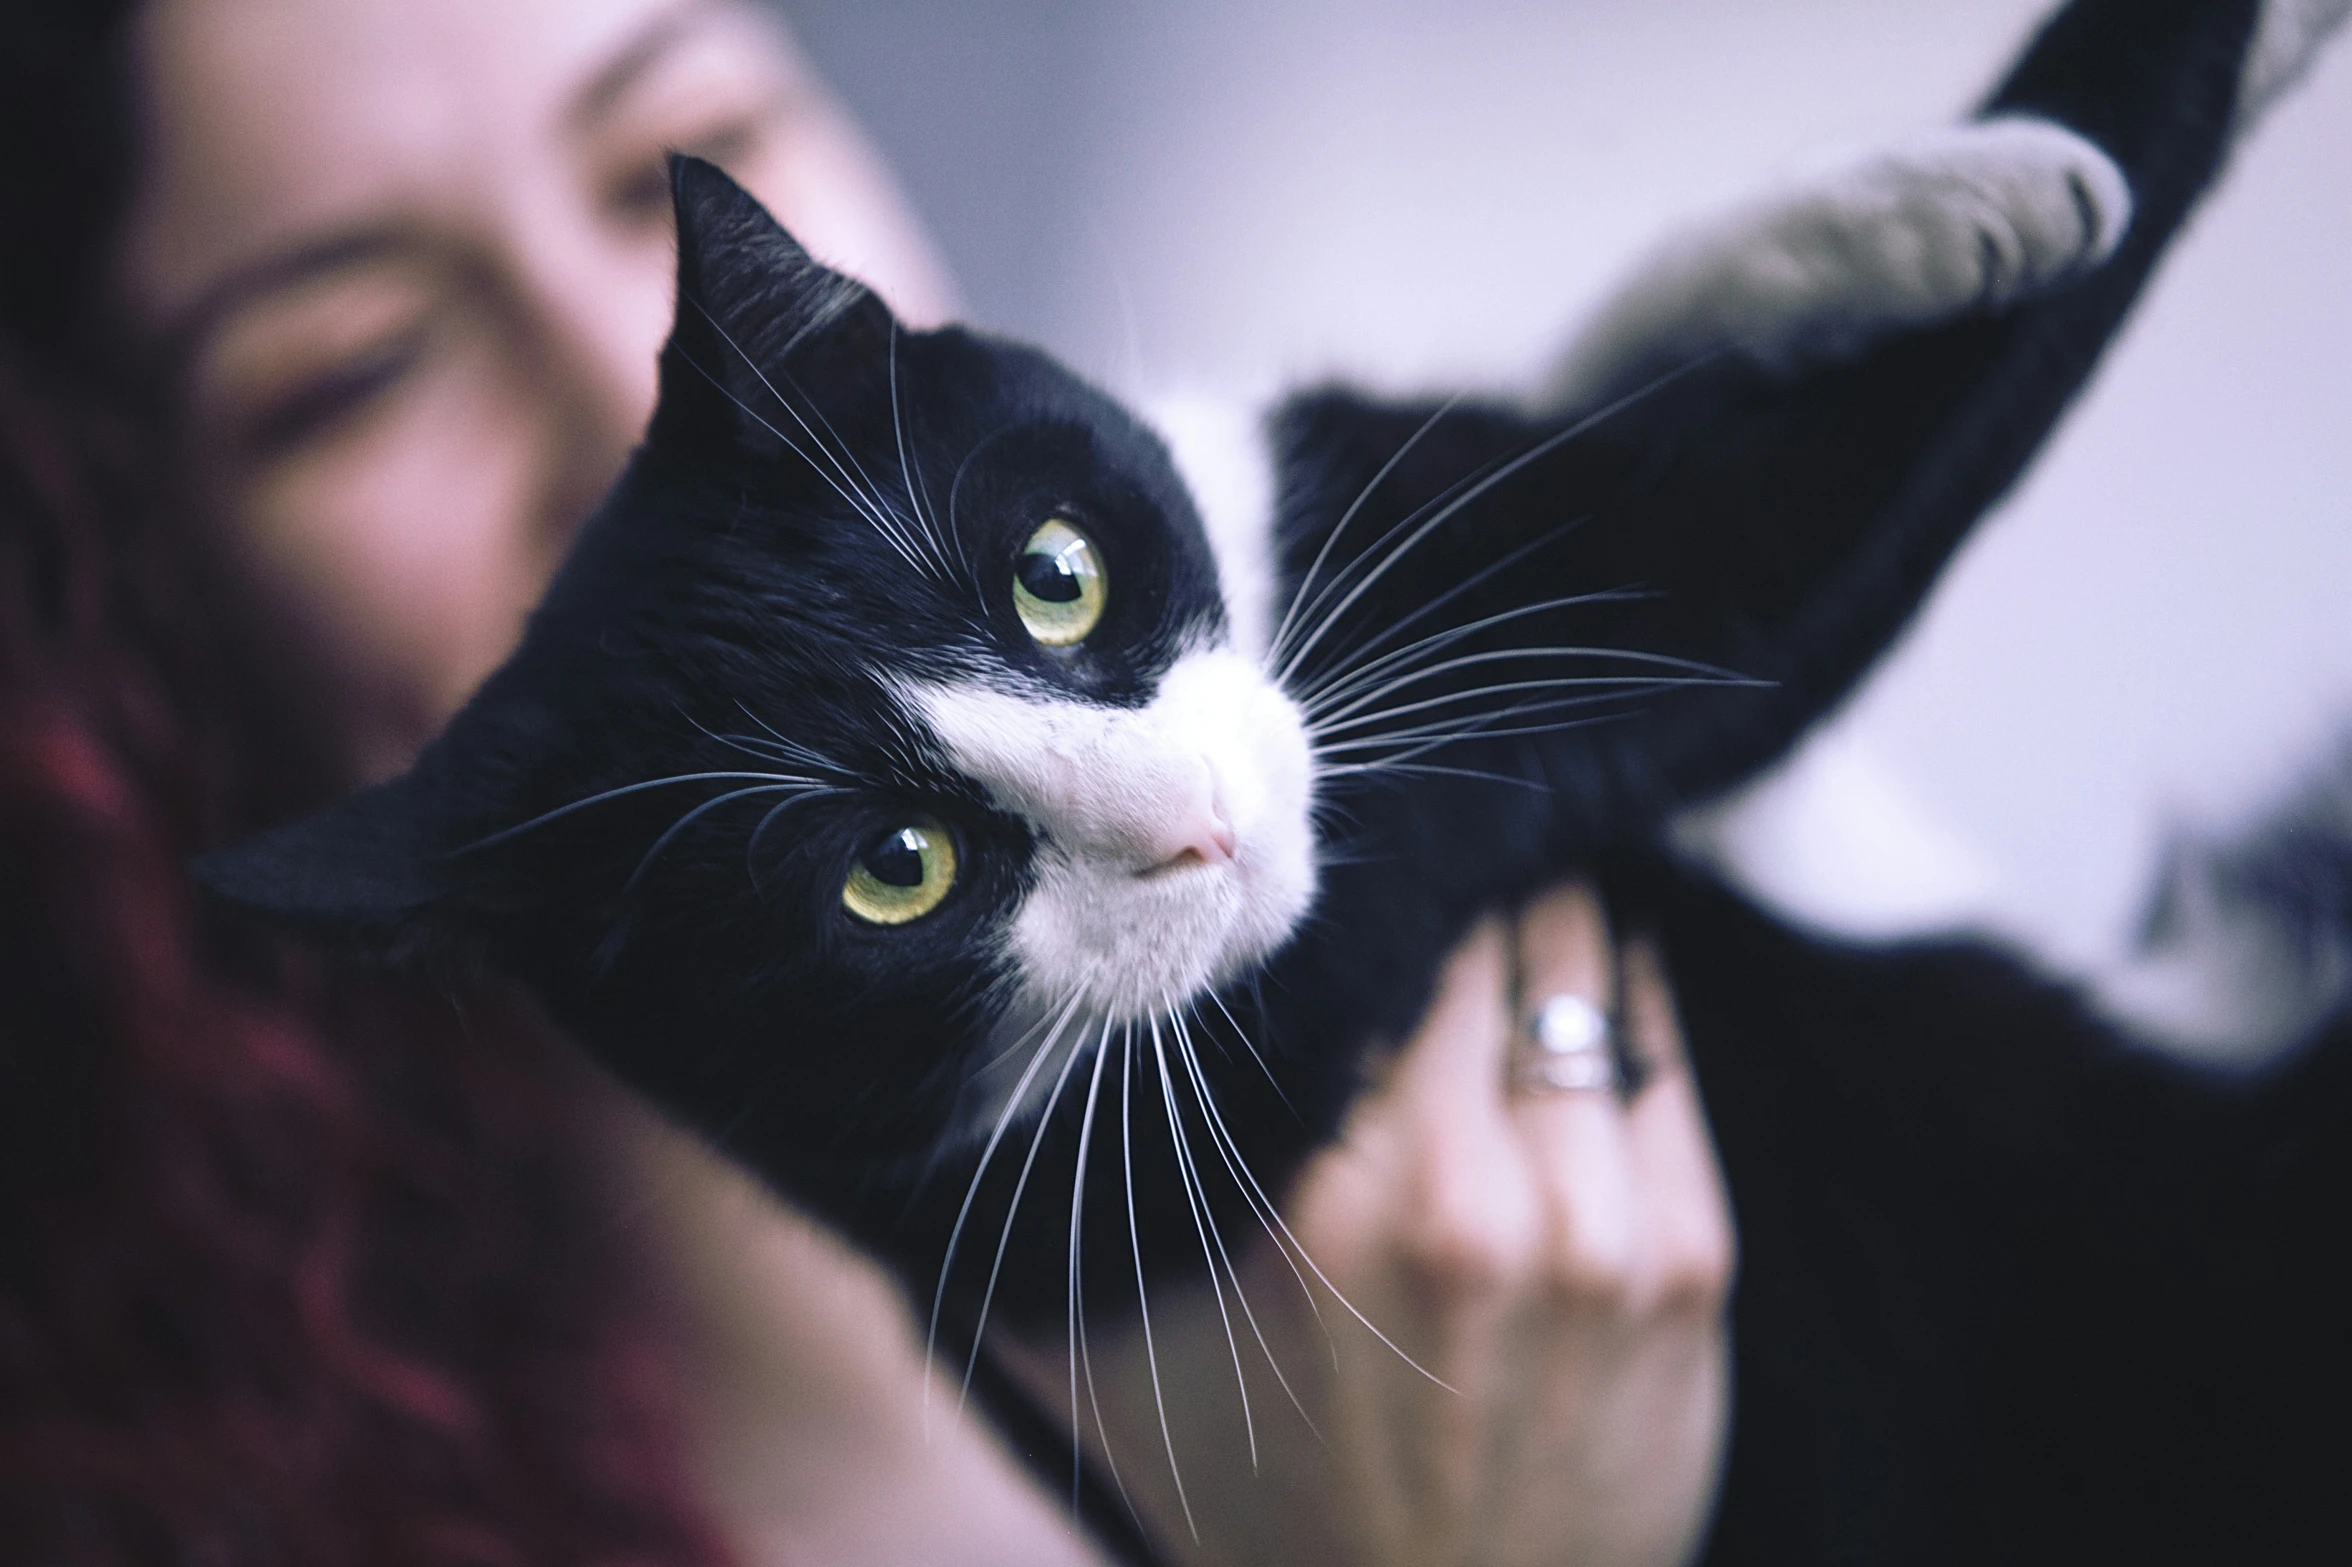 the woman holds a black and white cat, her eyes closed